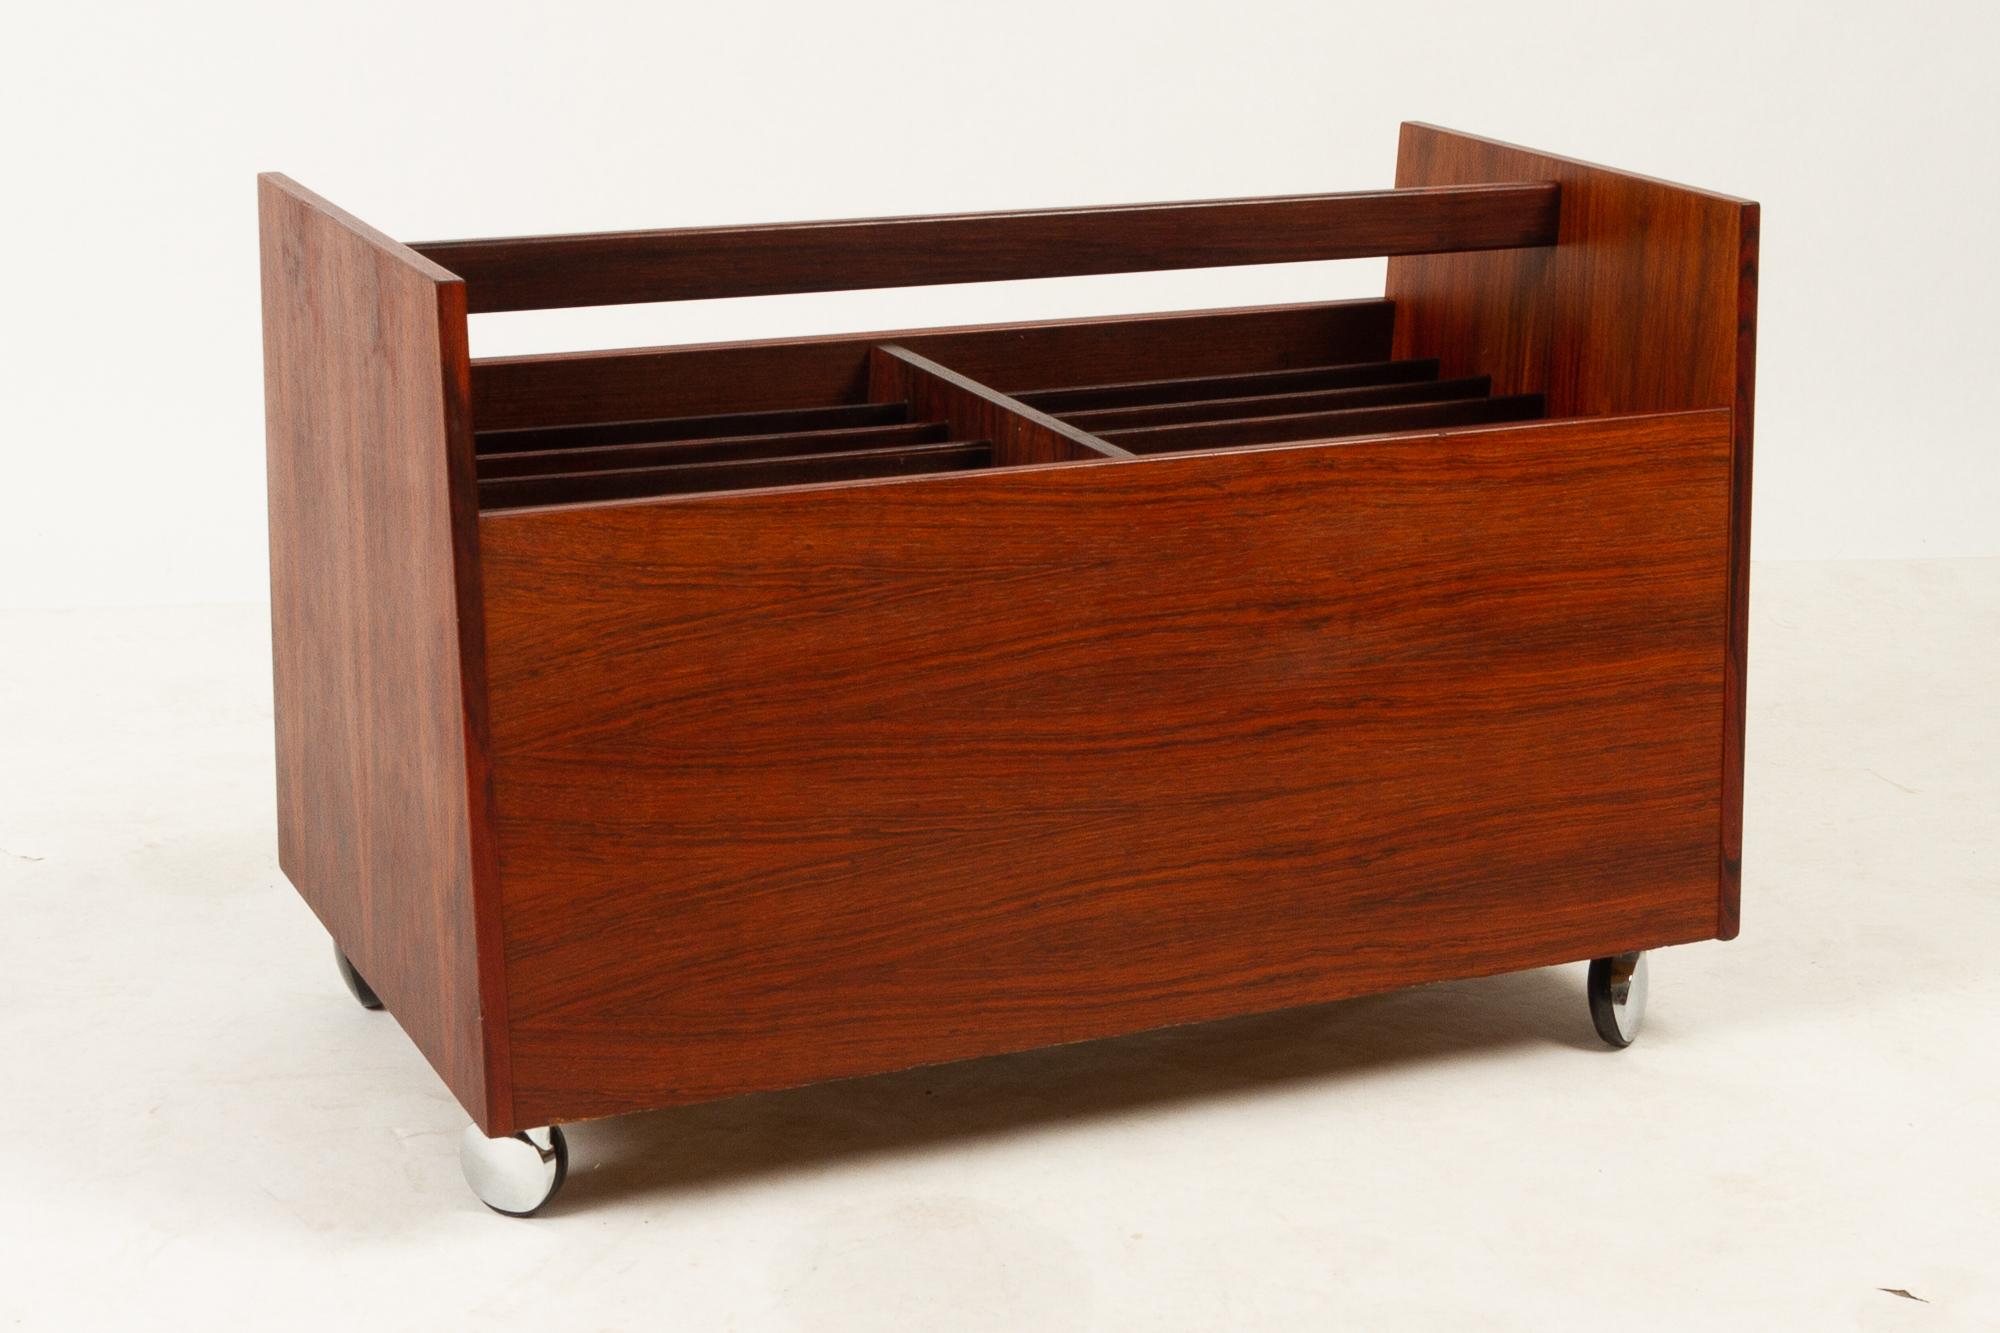 Magazine rack in rosewood by Rolf Hesland for Bruksbo, 1960s.
Mid-Century Modern magazine or vinyl cart. Rosewood veneer sides. Divided into 12 slots, that will fit vinyl records or magazines and newspapers. Four wheels. Beautiful veneer with small